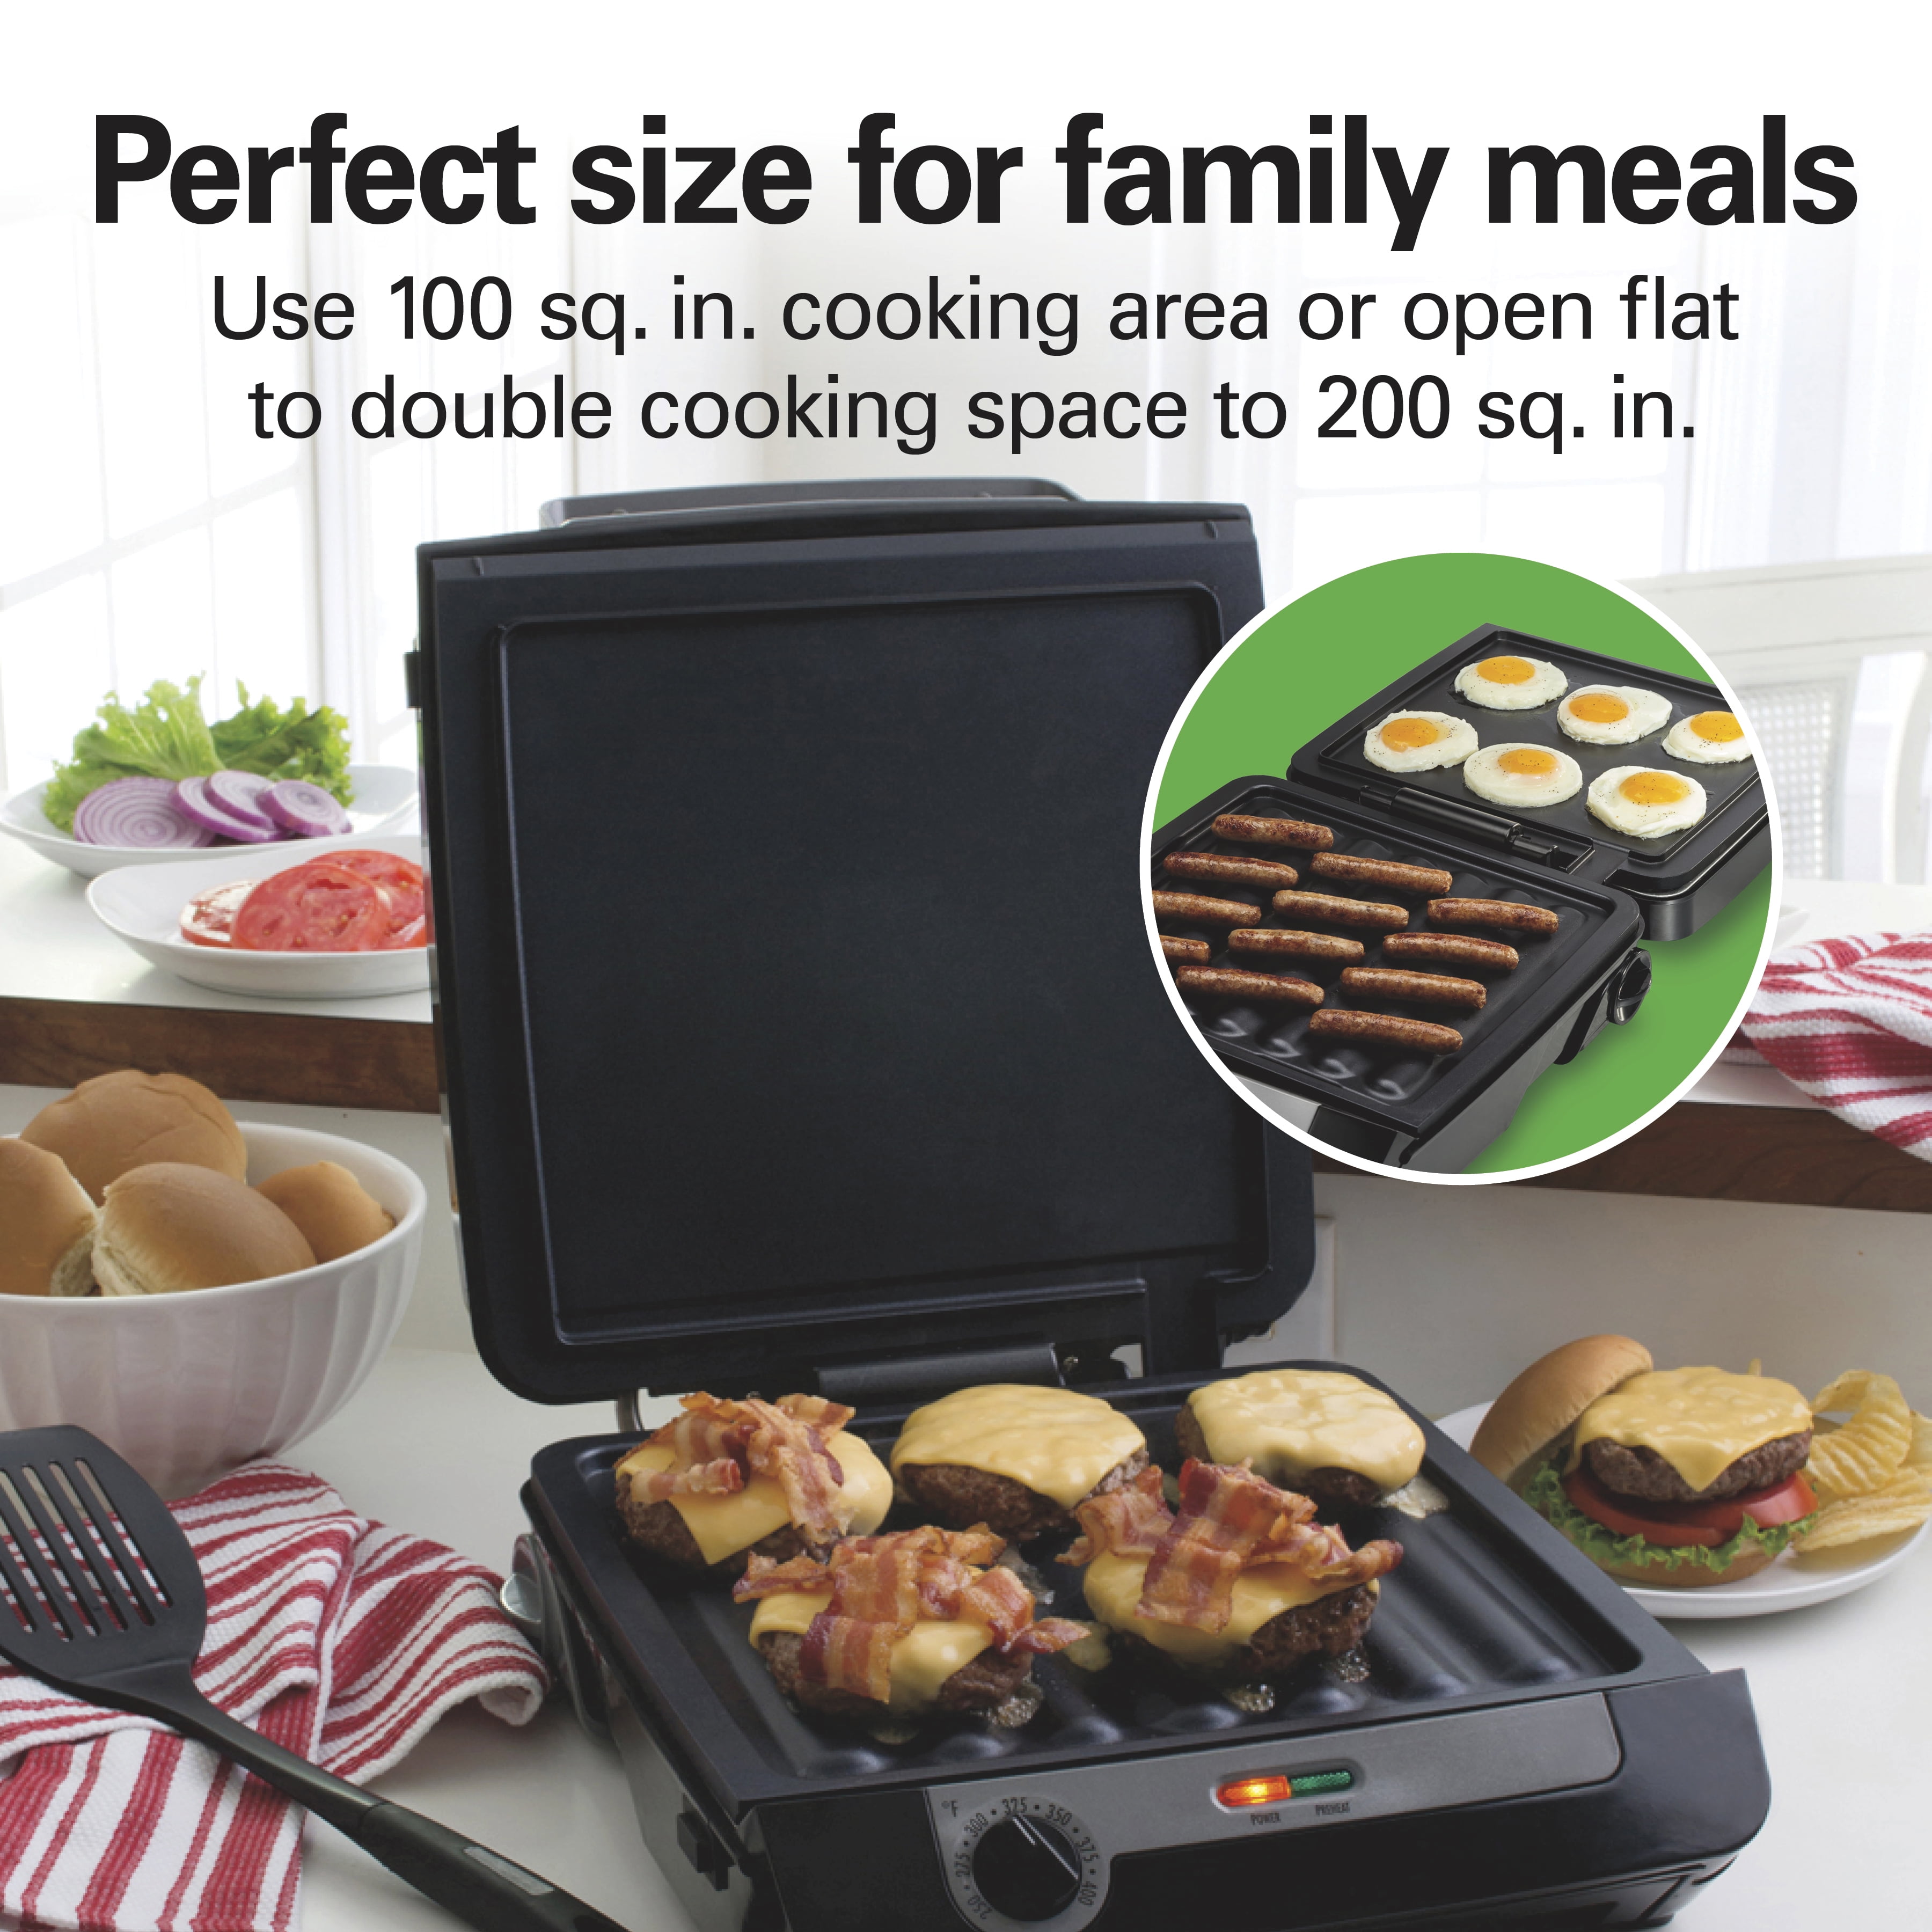 Hamilton Beach 3-in-1 Electric Indoor Grill + Griddle, 8-Serving,  Reversible Nonstick Plates, 2 Cooking Zones with Adjustable Temperature  (38546)